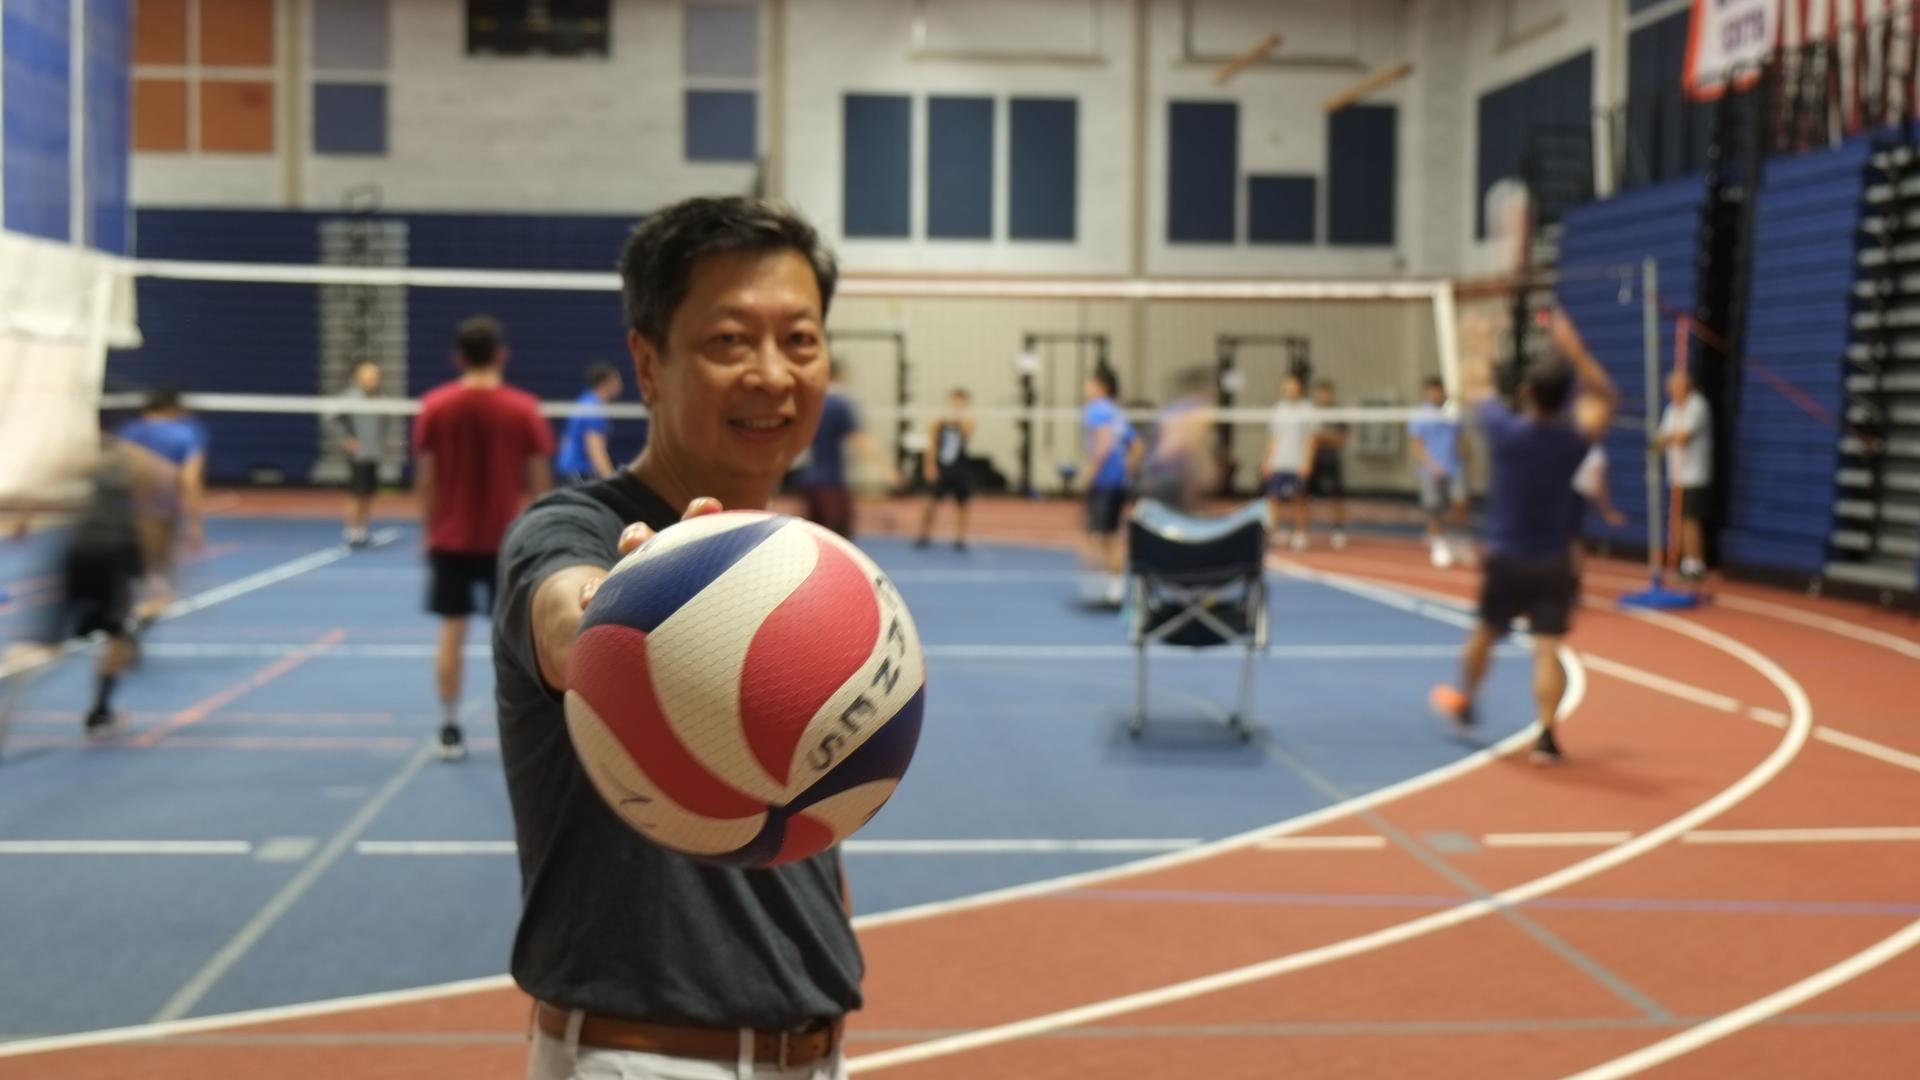 An Asian man holds a volleyball on the court